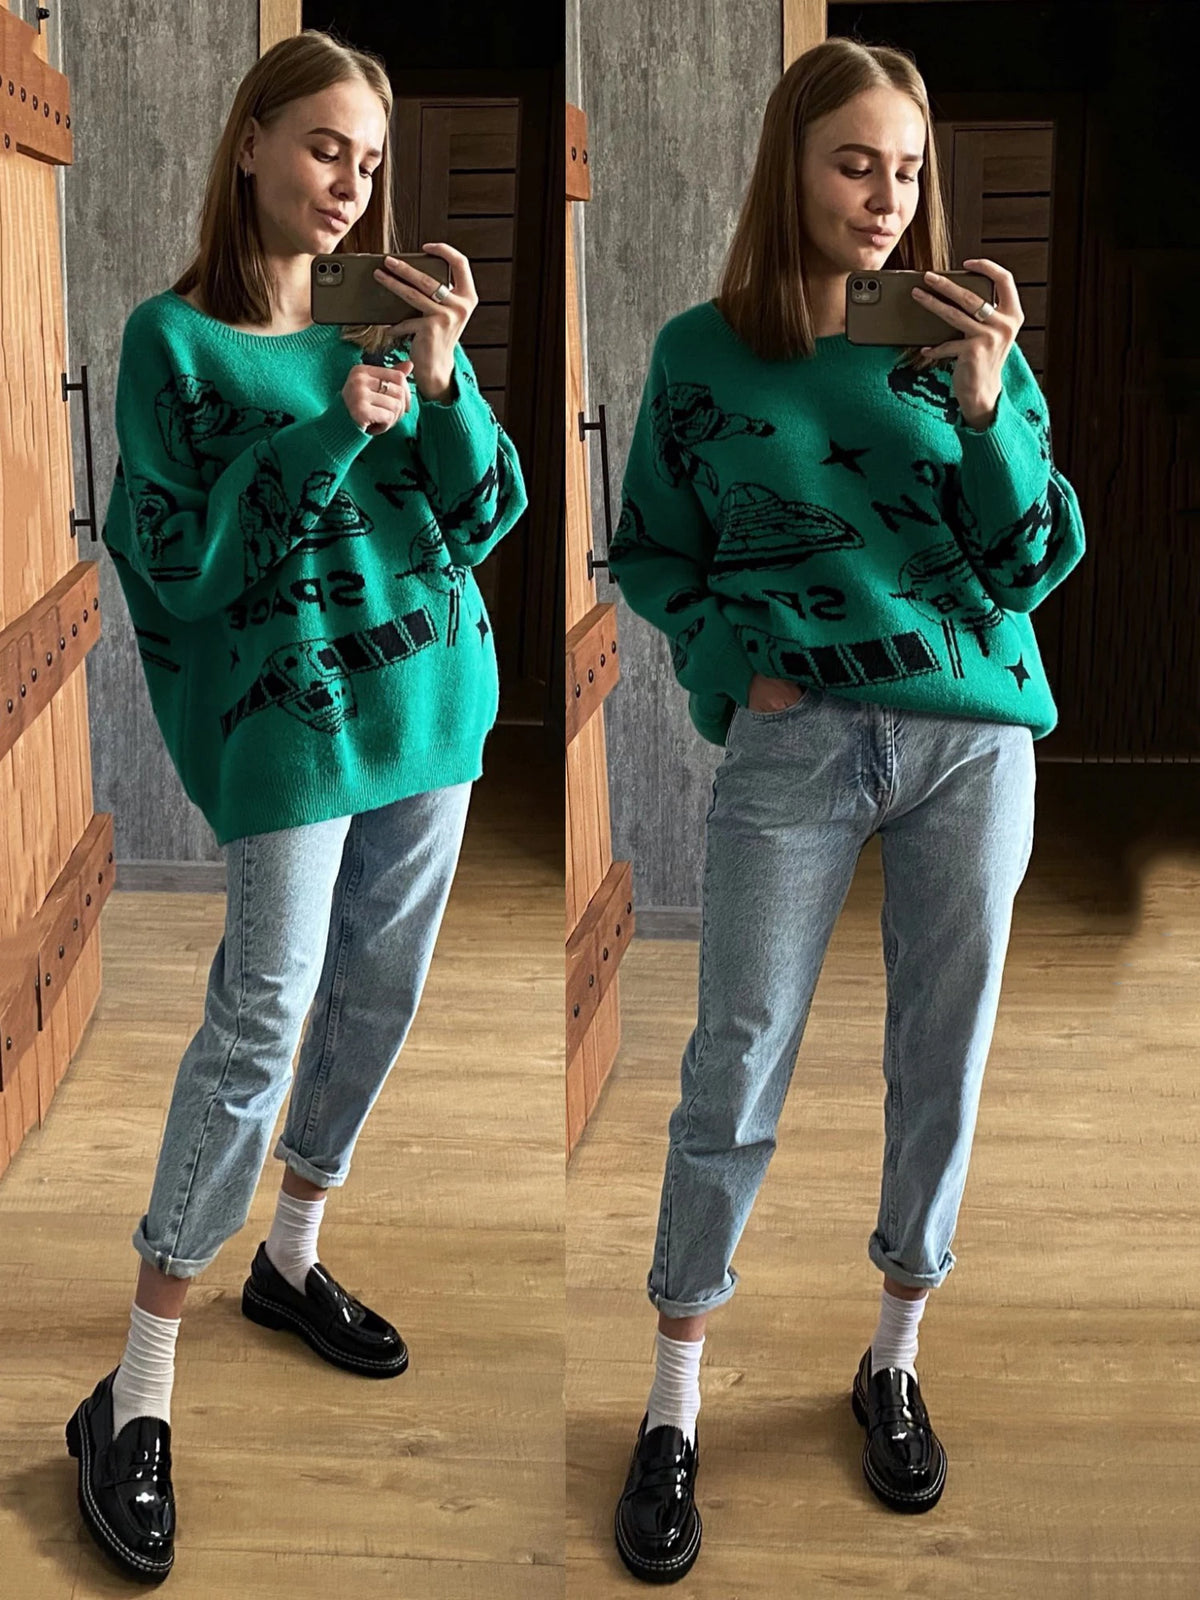 Hip Hop Streetwear Harajuku Oversized Sweater Vintag Retro Jumper UFO Knitted Jumper 2022 Thicken Warm  Pullover C-099